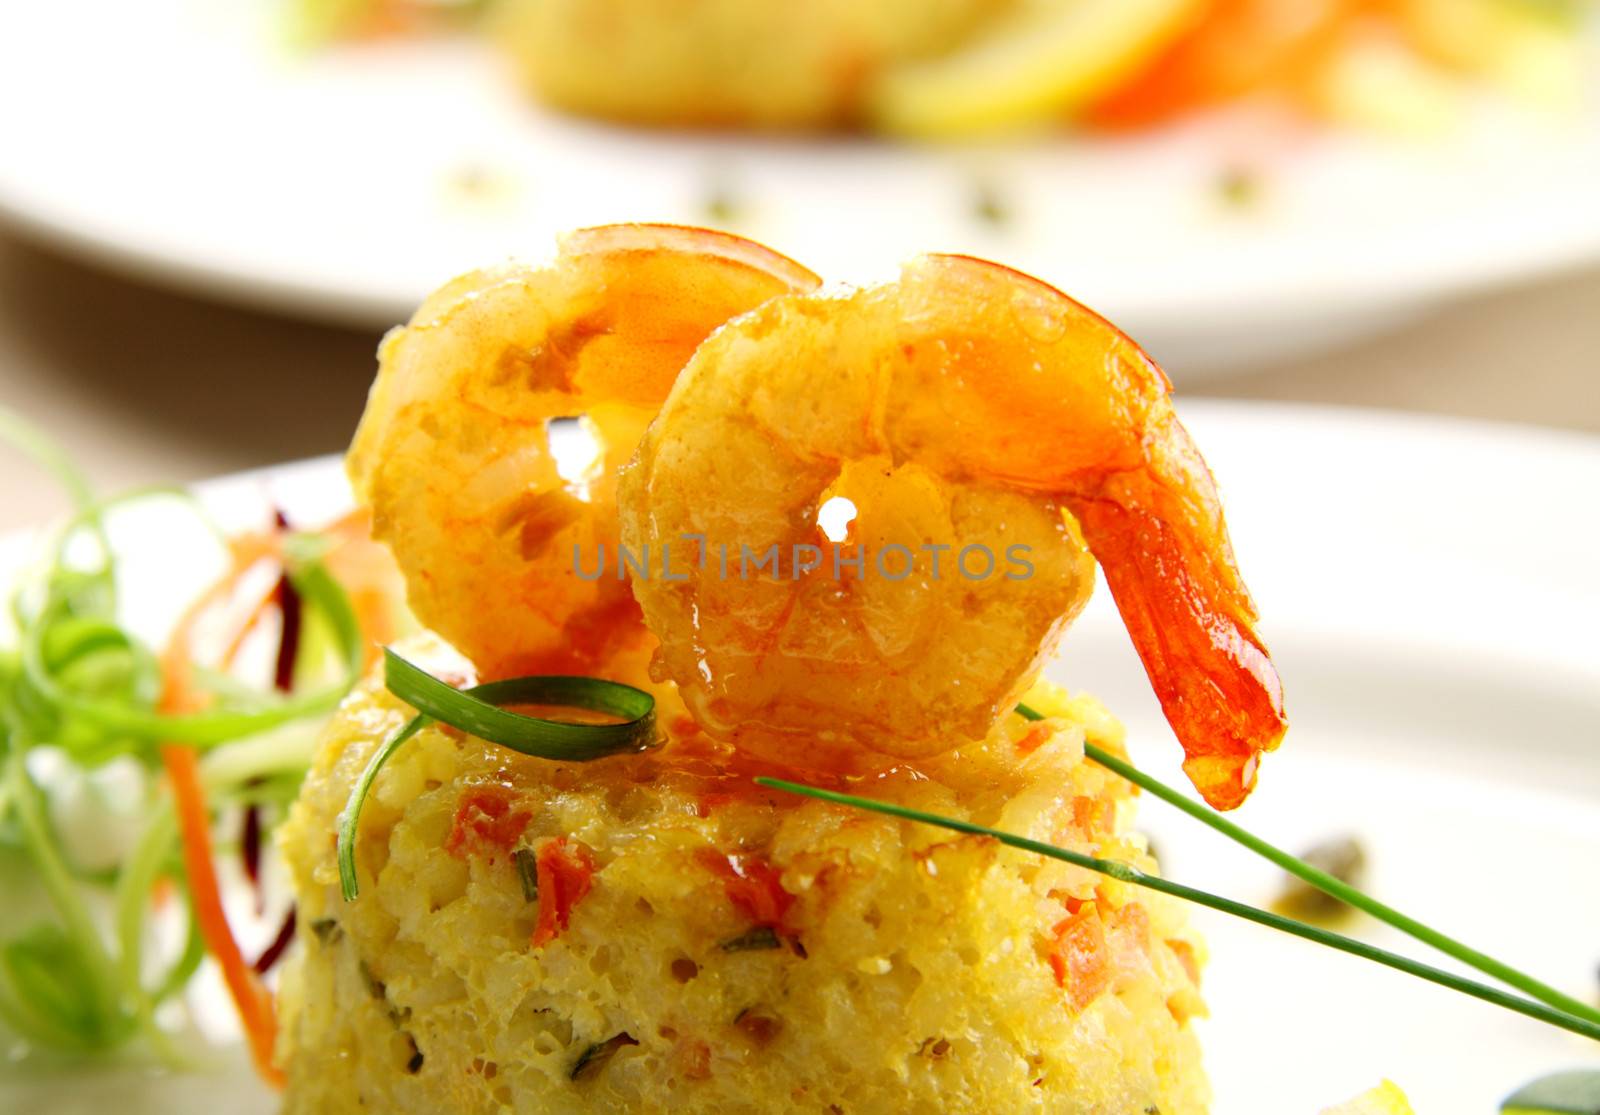 Delicious grilled shrimps on a risotto stack with side salad.